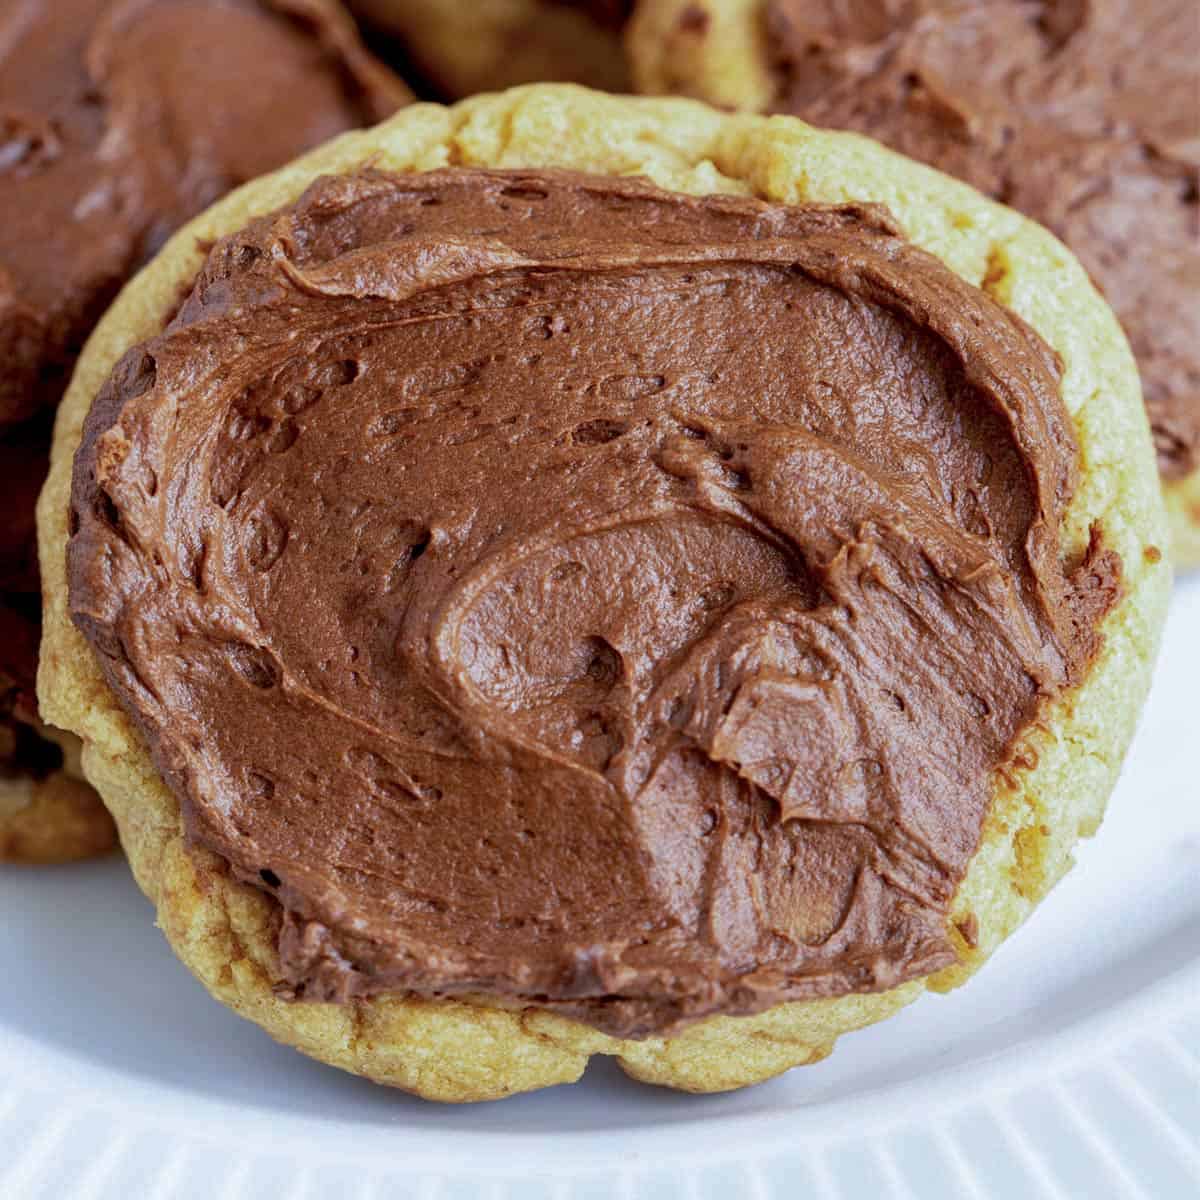 Front view of a peanut butter cookie with chocolate icing on a white plate.